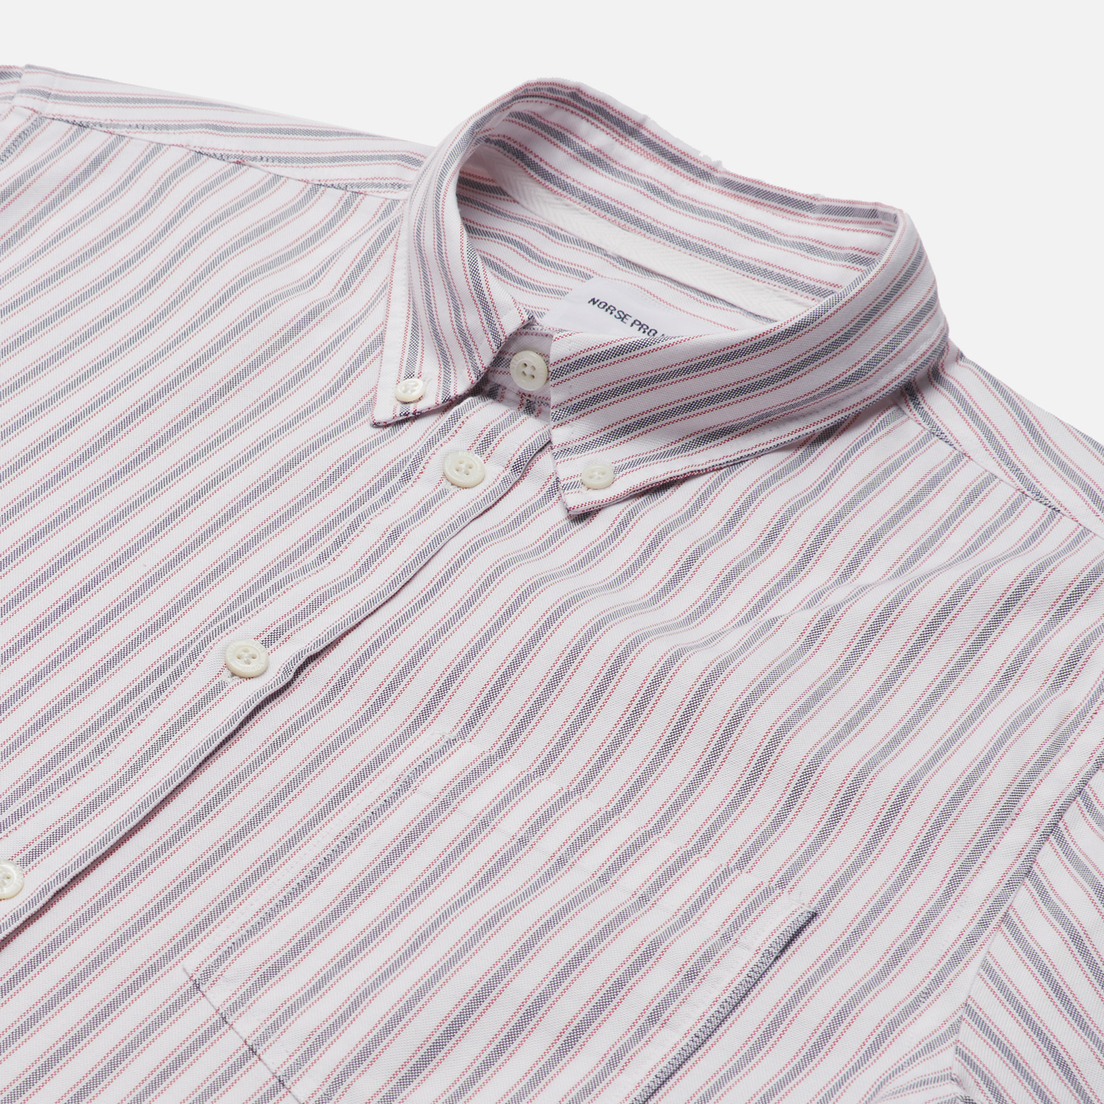 Norse Projects Мужская рубашка Anton Oxford